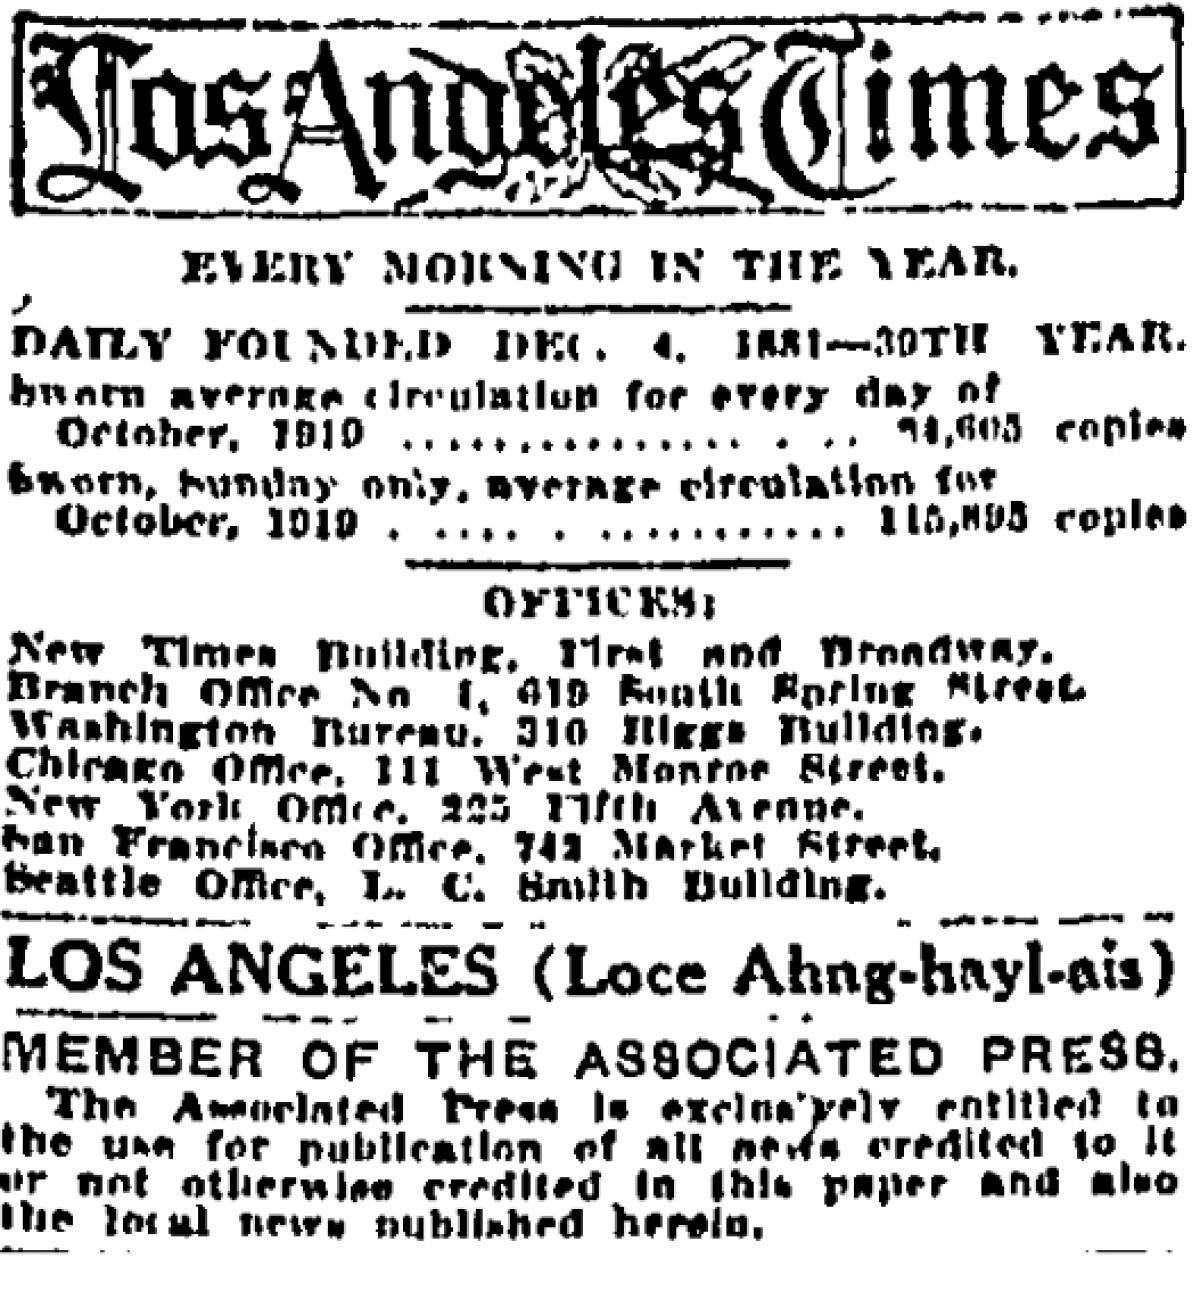 A 1920 Times masthead included a pronunciation guide for Los Angeles: "Loce Ahng-hayl-ais."